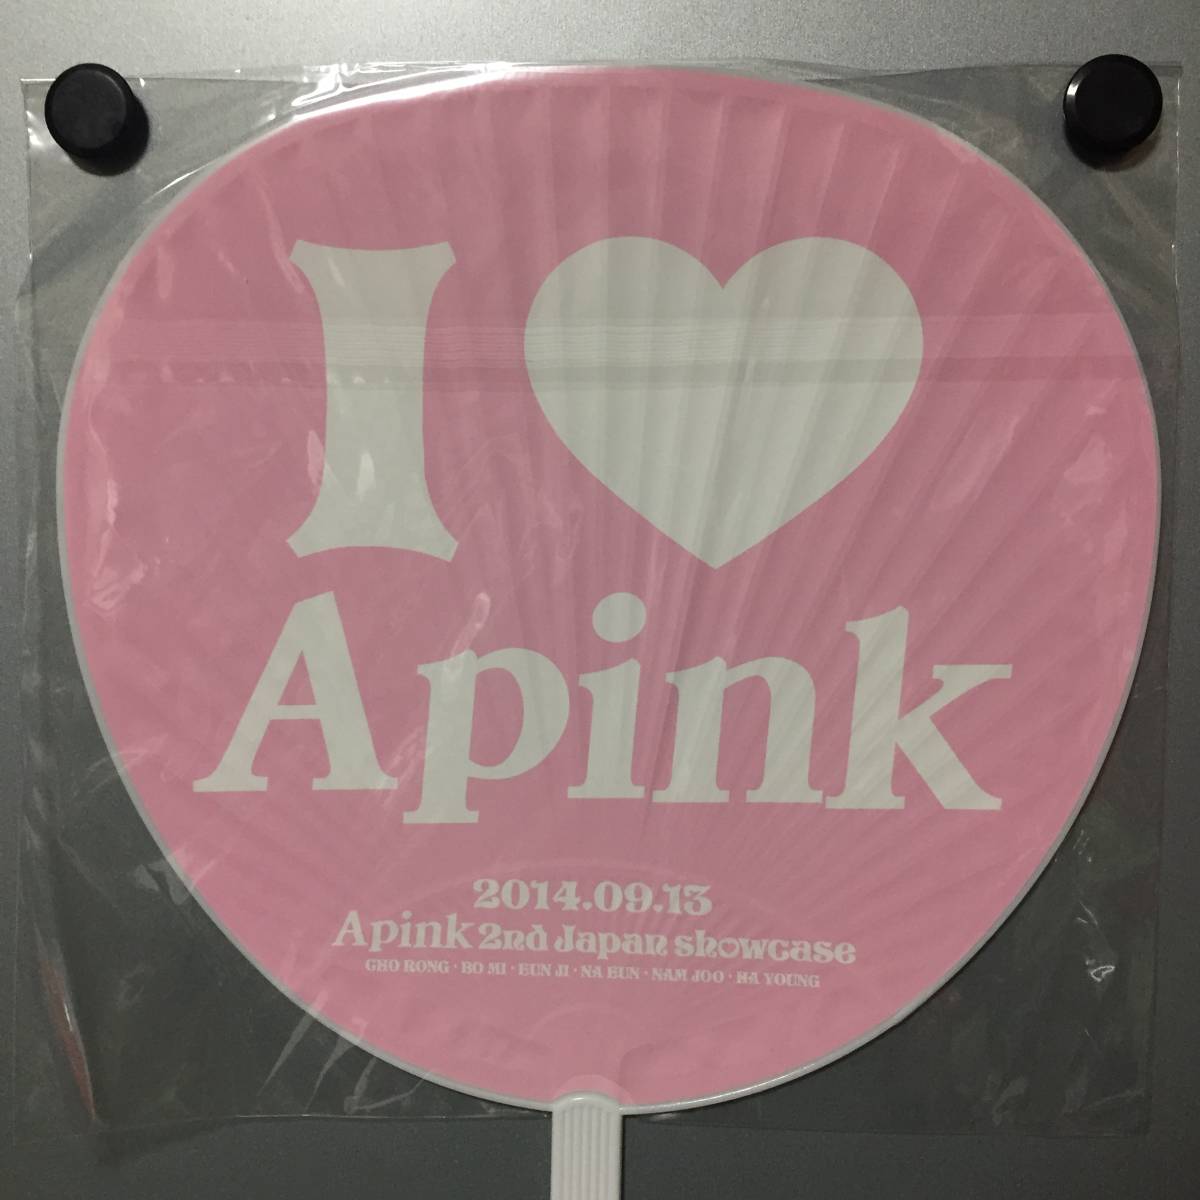 * new goods unopened * APINK 1st SC [ 2nd Japan showcase ] "uchiwa" fan Choro n* Japan limitation showcase official goods complete sale goods 